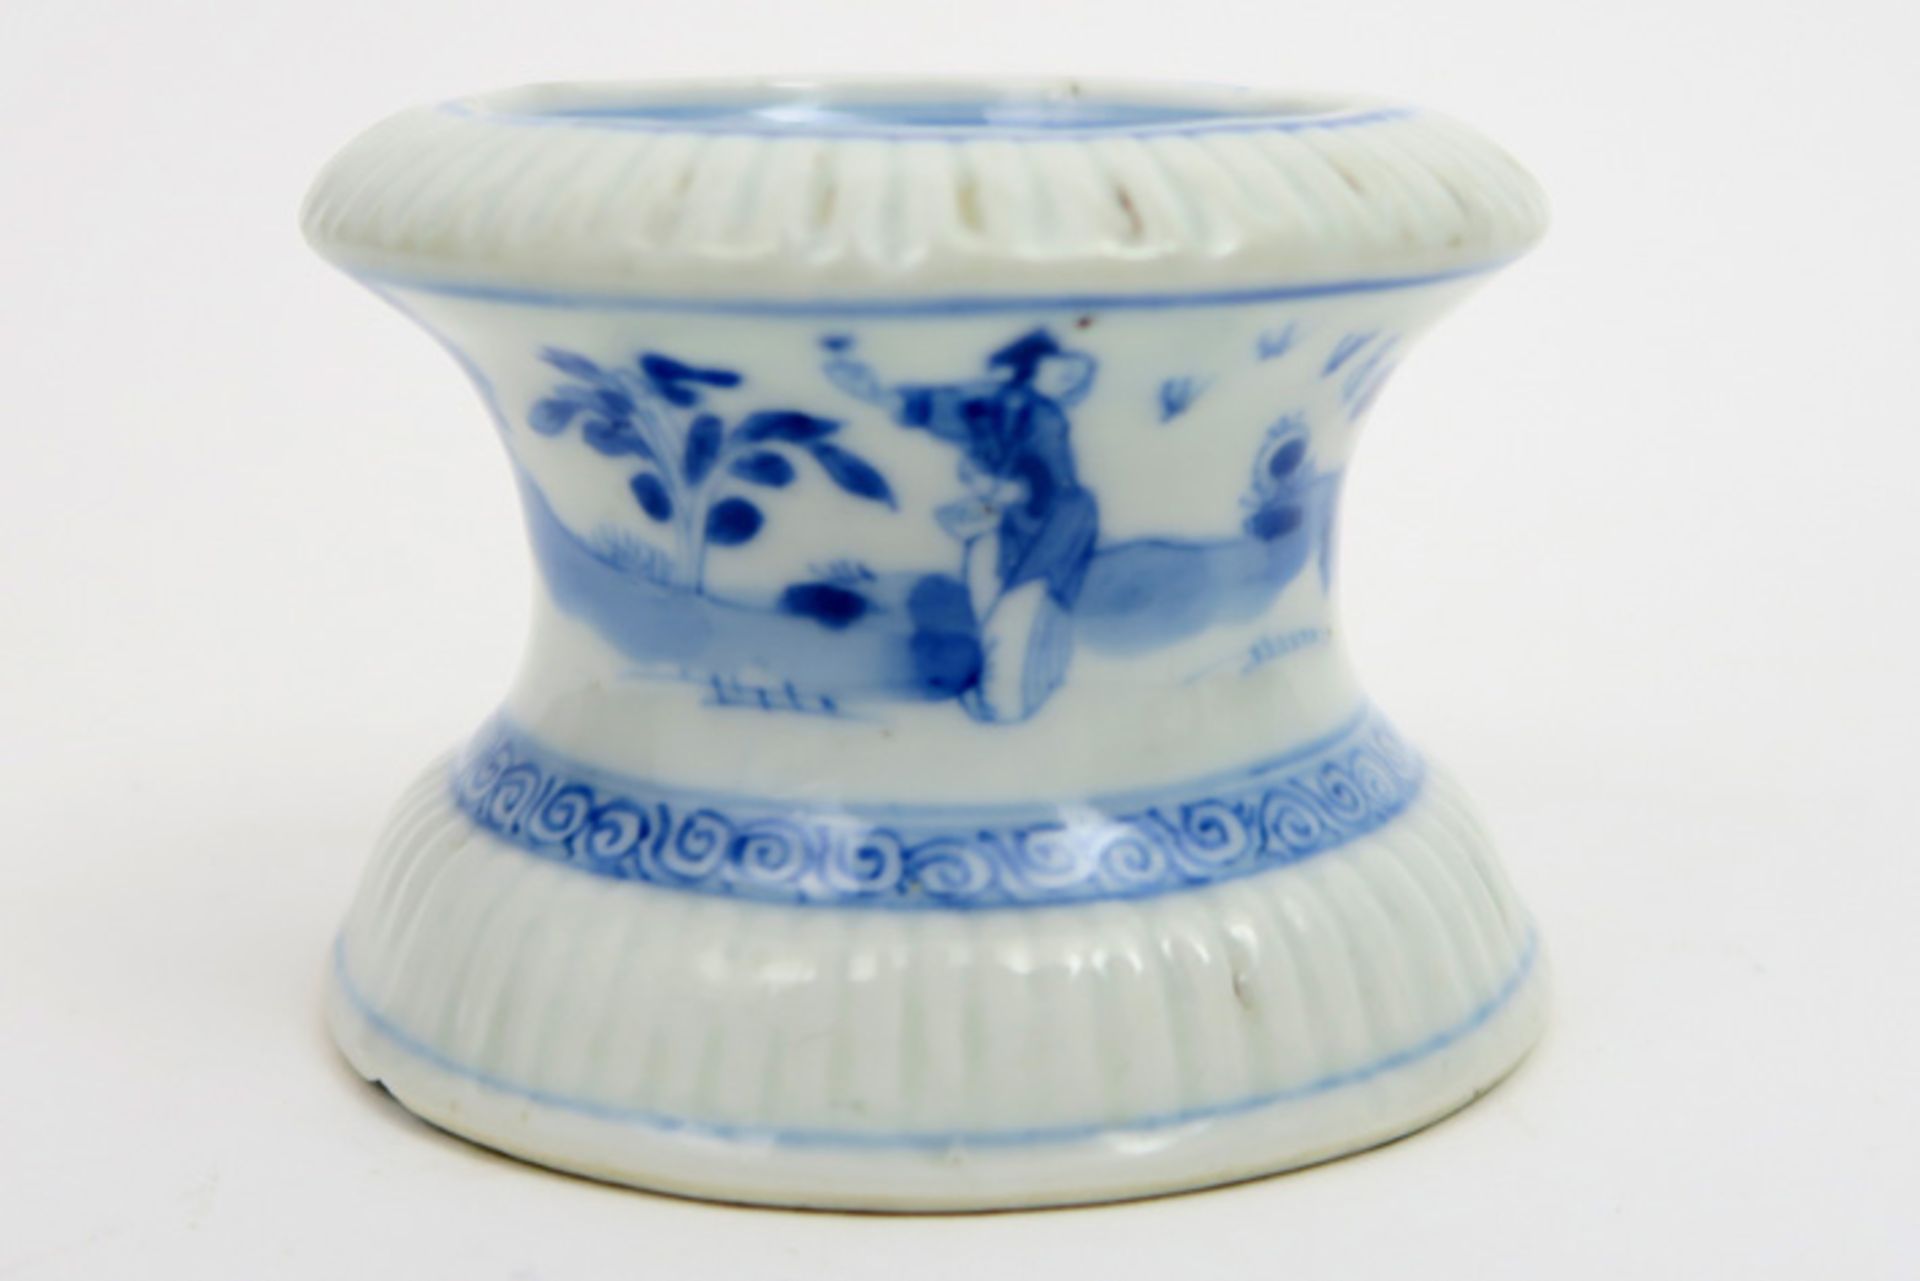 18th Cent. Chinese salt cellar in porcelain with blue-white decor with figures in a landscape - Image 4 of 5